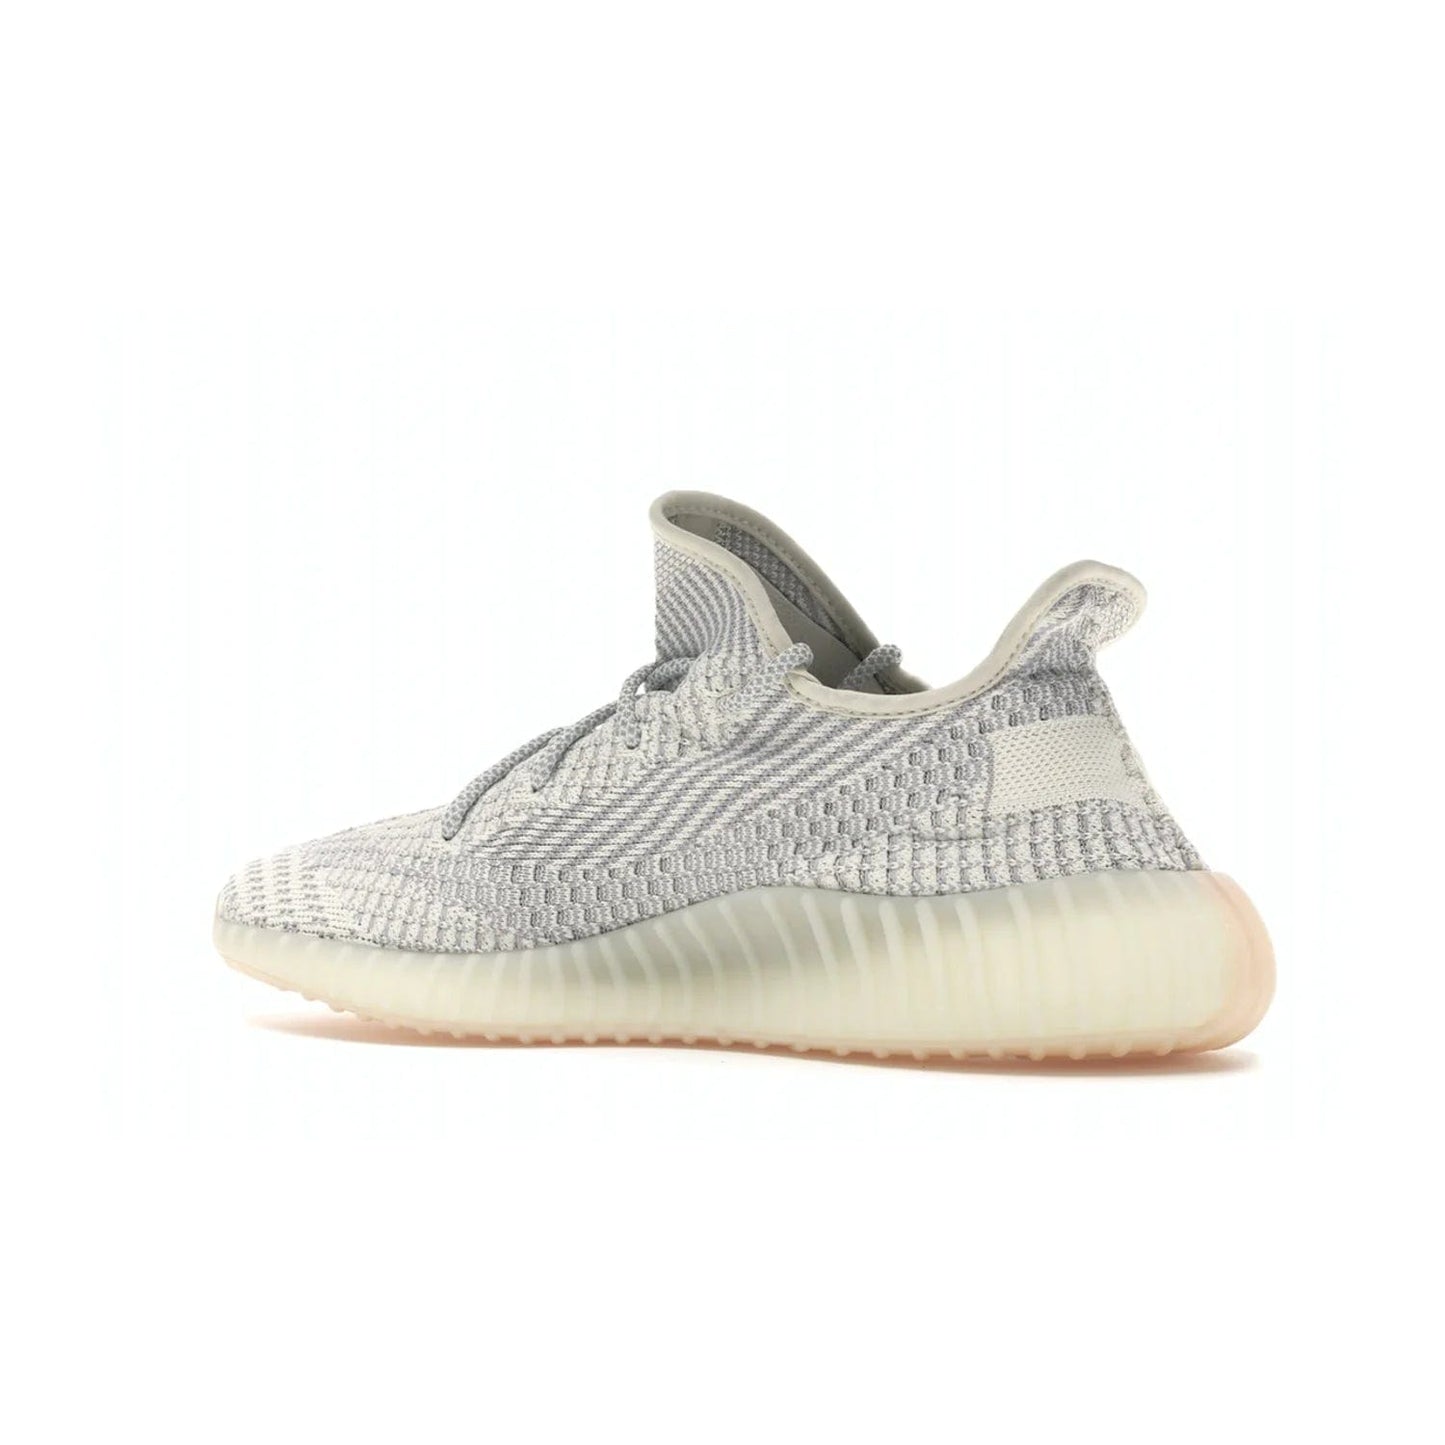 adidas Yeezy Boost 350 V2 Lundmark (Non Reflective) - Image 22 - Only at www.BallersClubKickz.com - Shop the exclusive adidas Yeezy Boost 350 V2 Lundmark with a subtle summer color, mesh upper, white-to-cream transitional midsole, light tan outsole, and pink middle stripe. Comfort and style come together in this perfect summer 350 V2. Released on July 11, 2019.